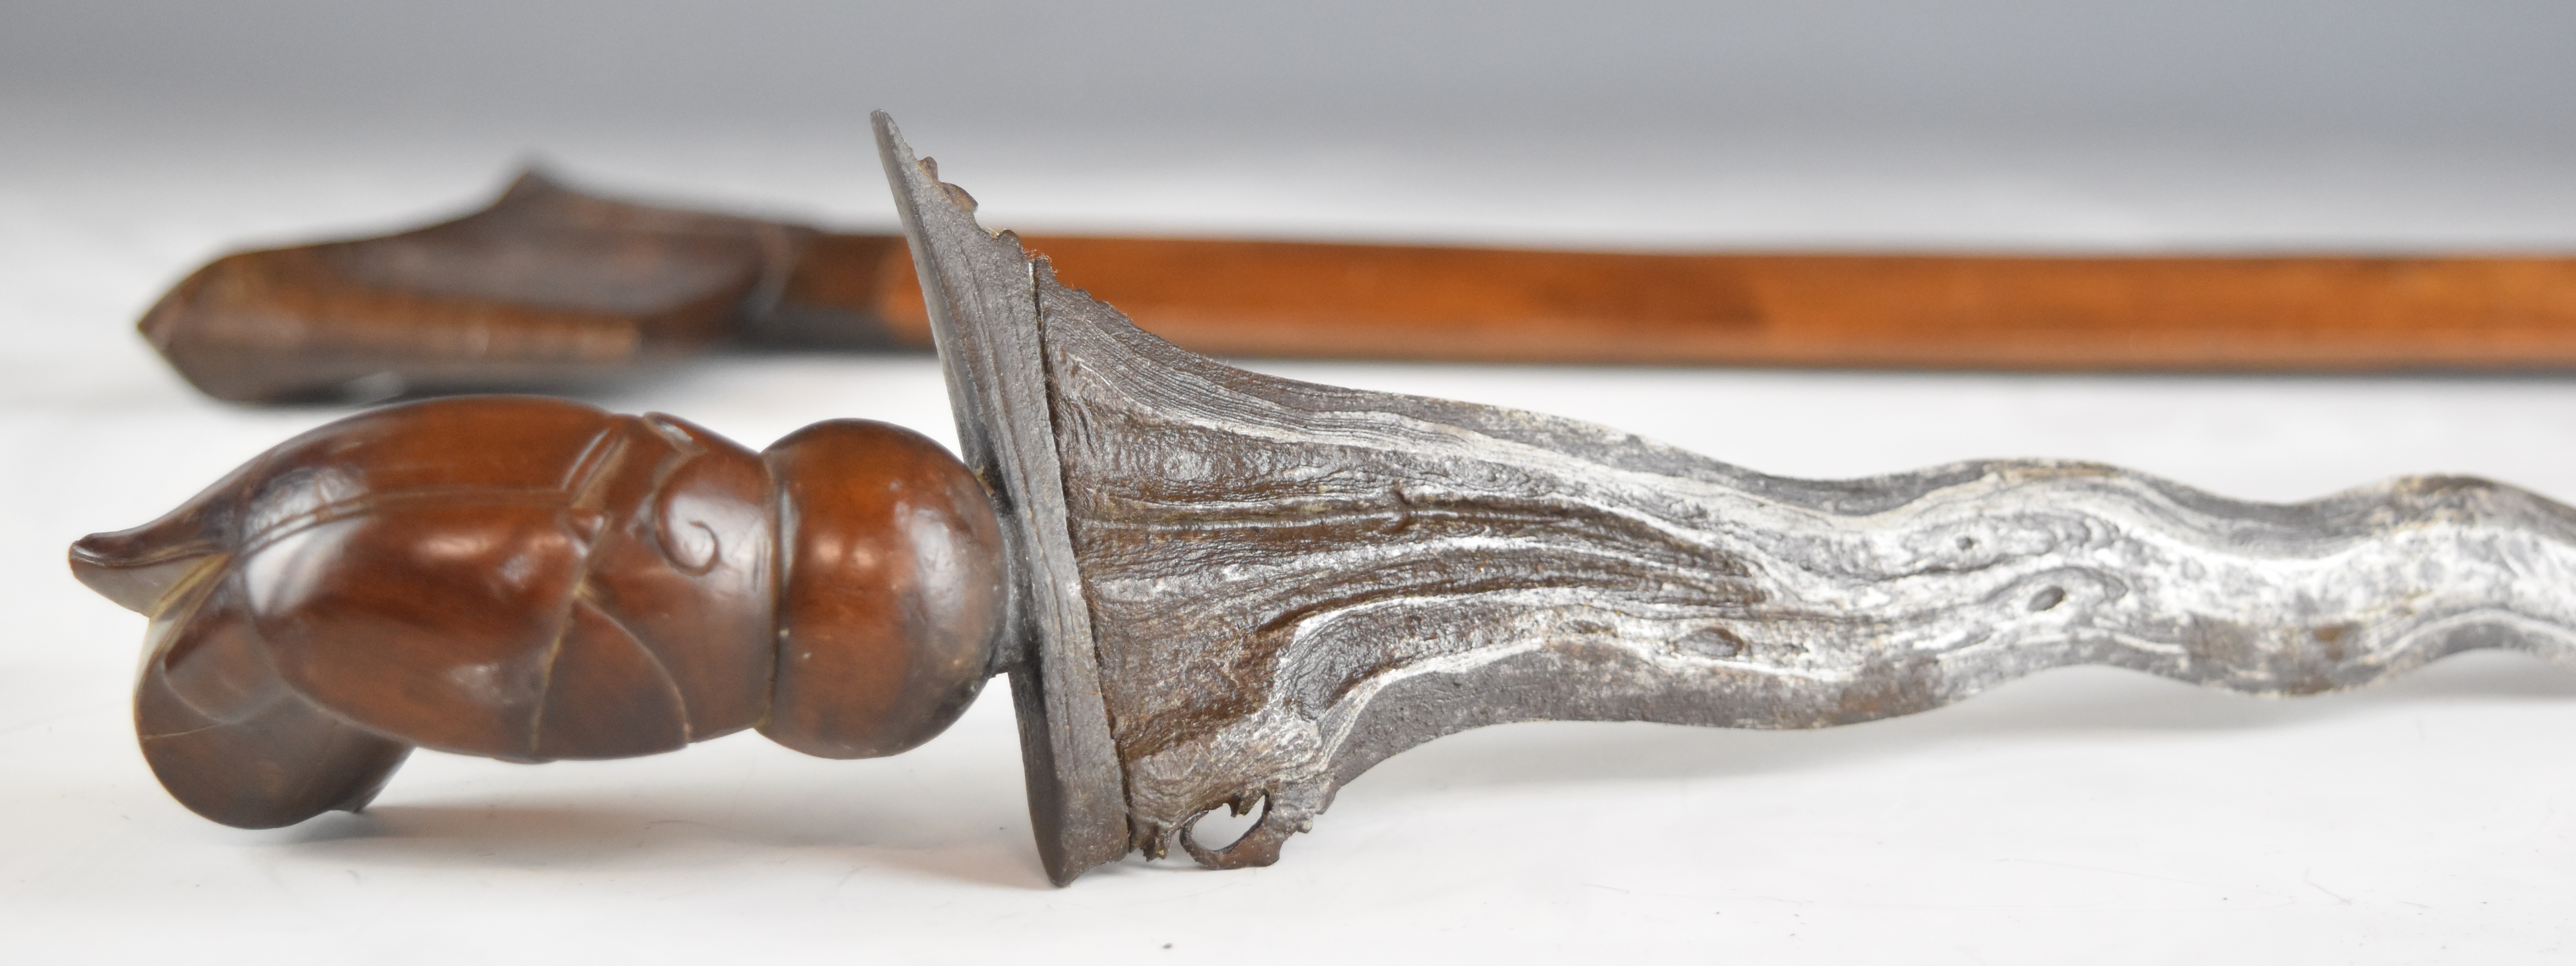 Malaysian Kris dagger with wooden grip, wavy edged 32cm blade and scabbard, together with a modern - Image 7 of 7